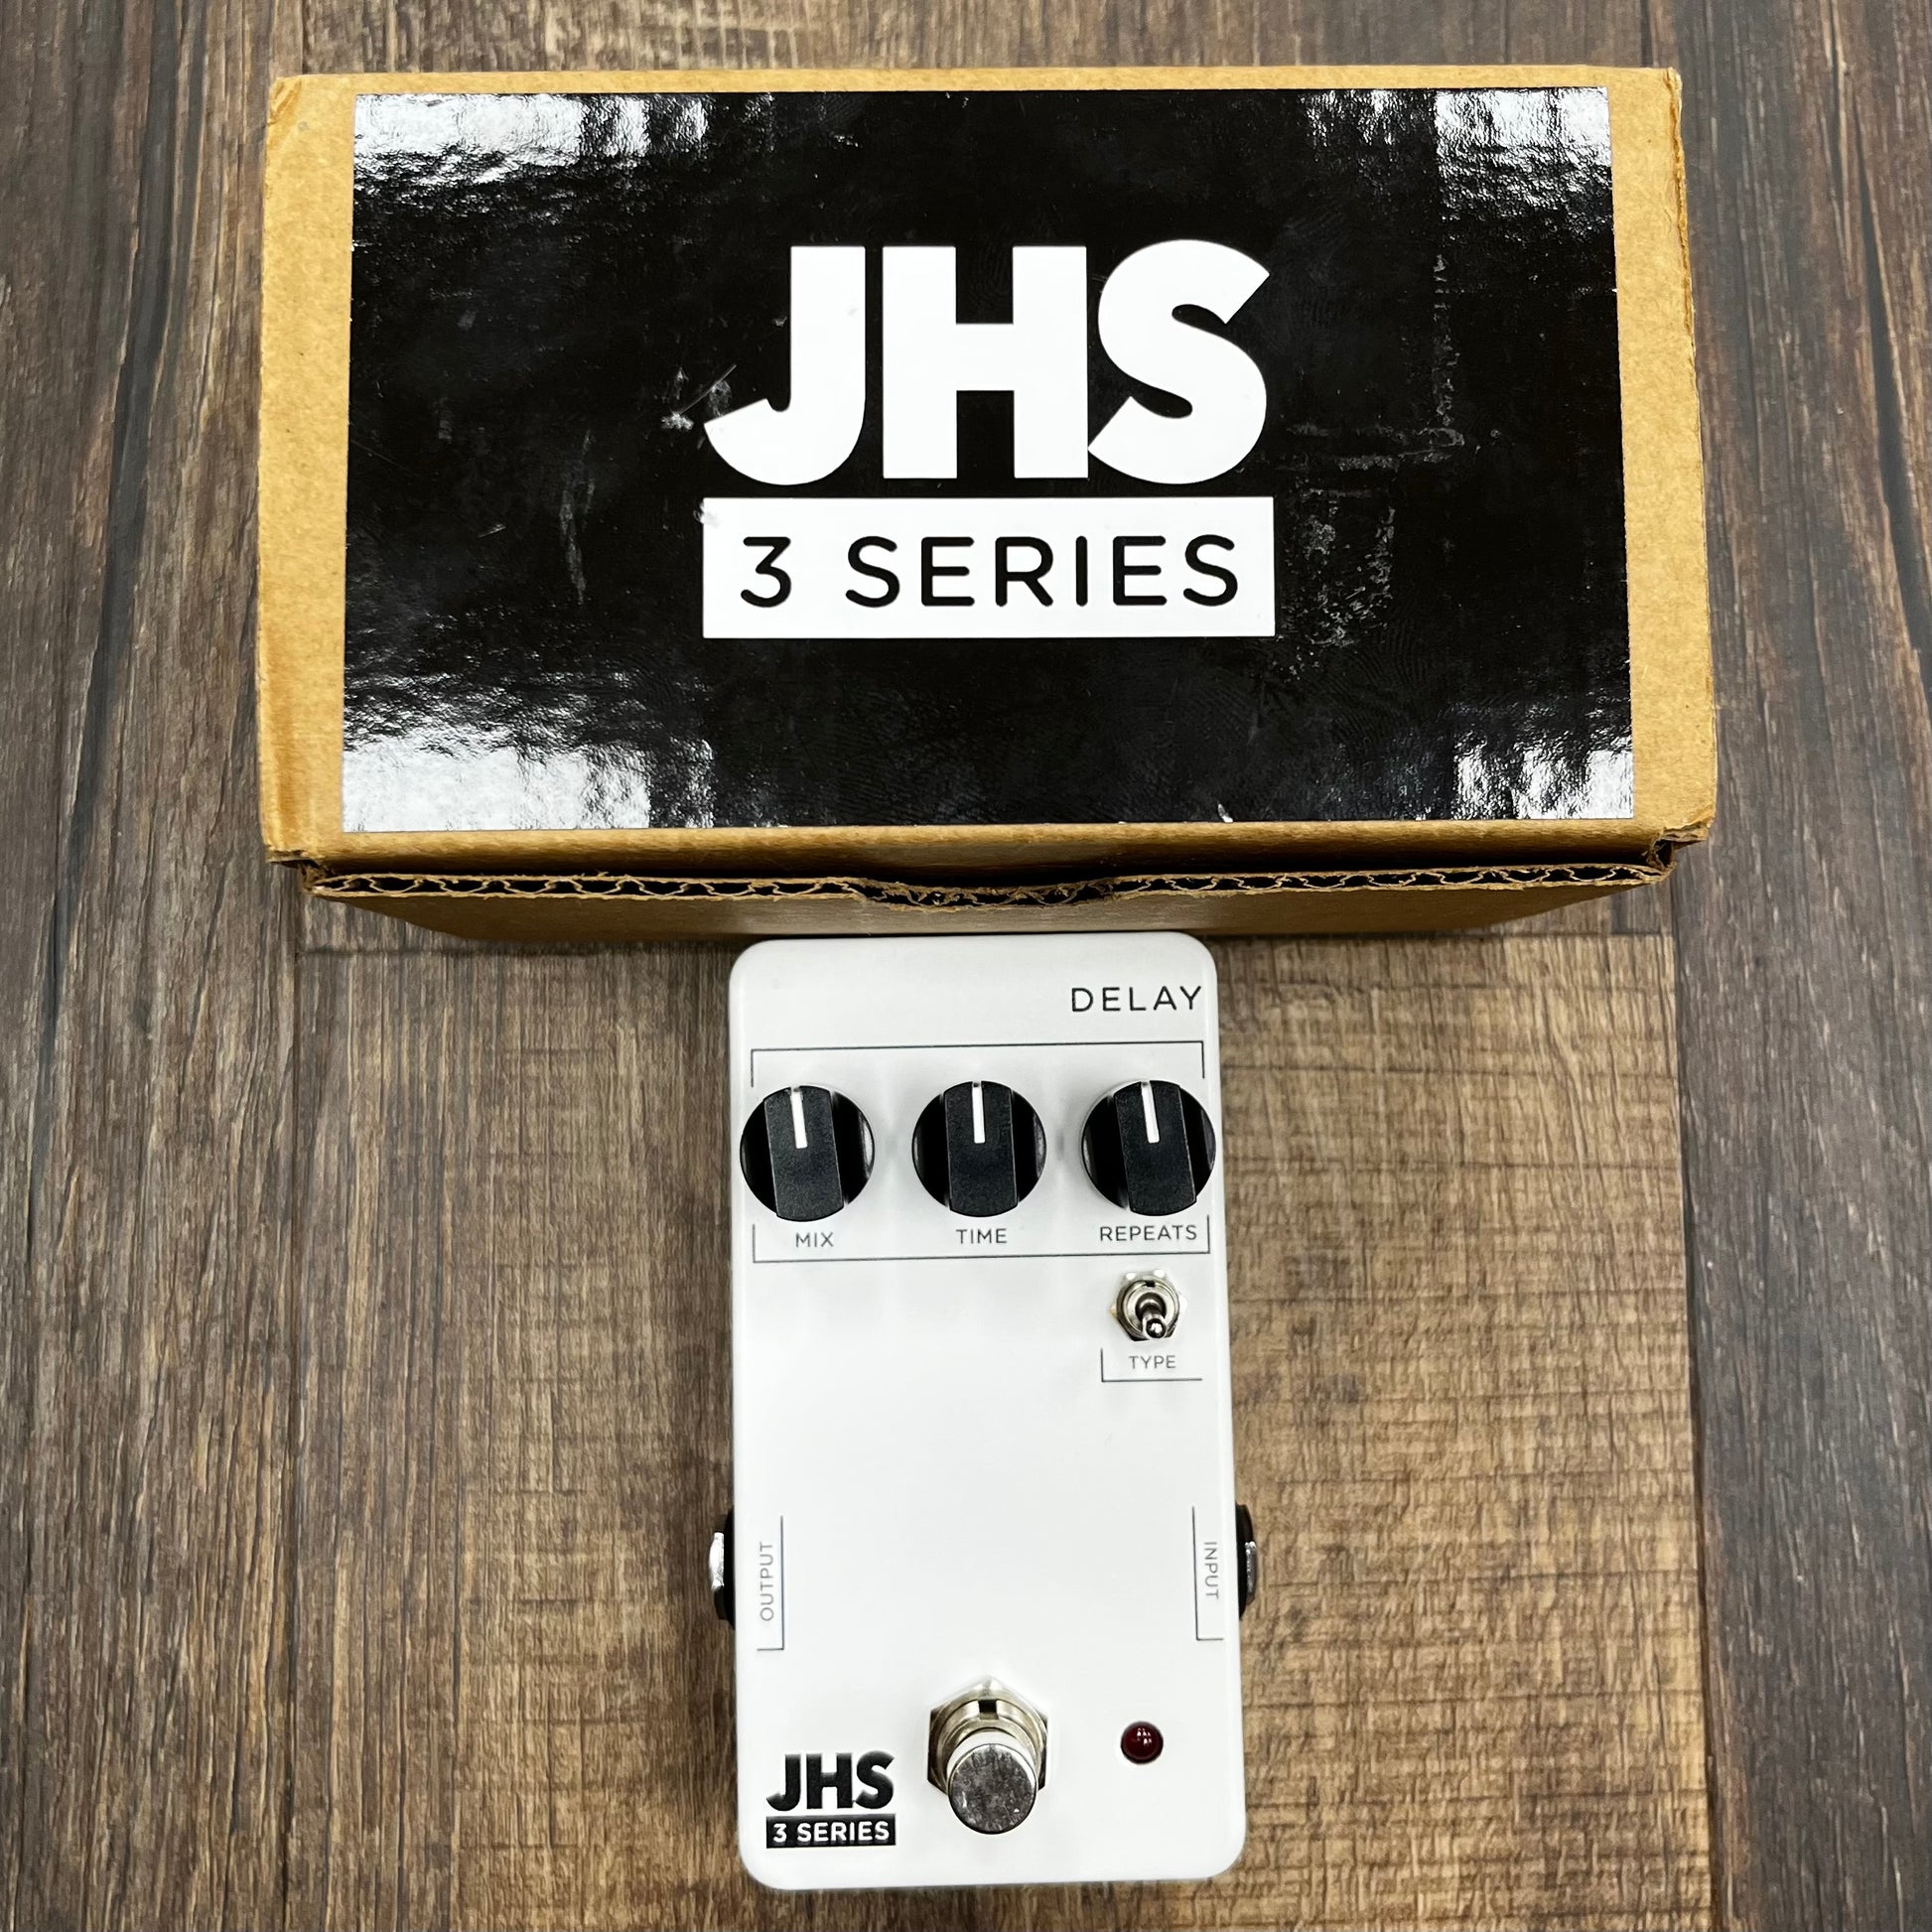 Top of w/box of Used JHS Pedals 3 Series Delay Pedal  w/Box TFW198